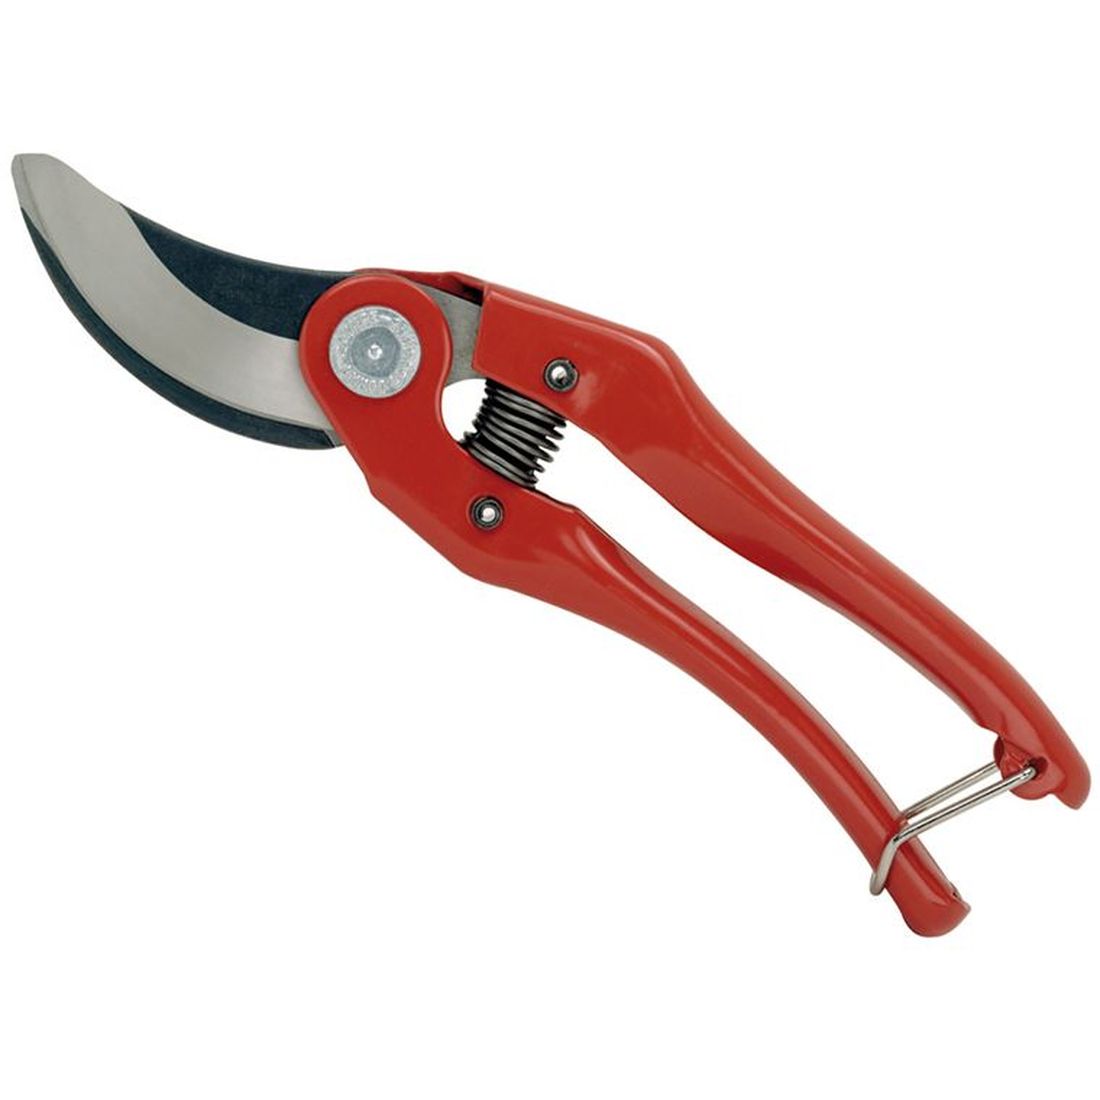 Bahco P121-23 Bypass Secateurs 25mm Capacity                                          